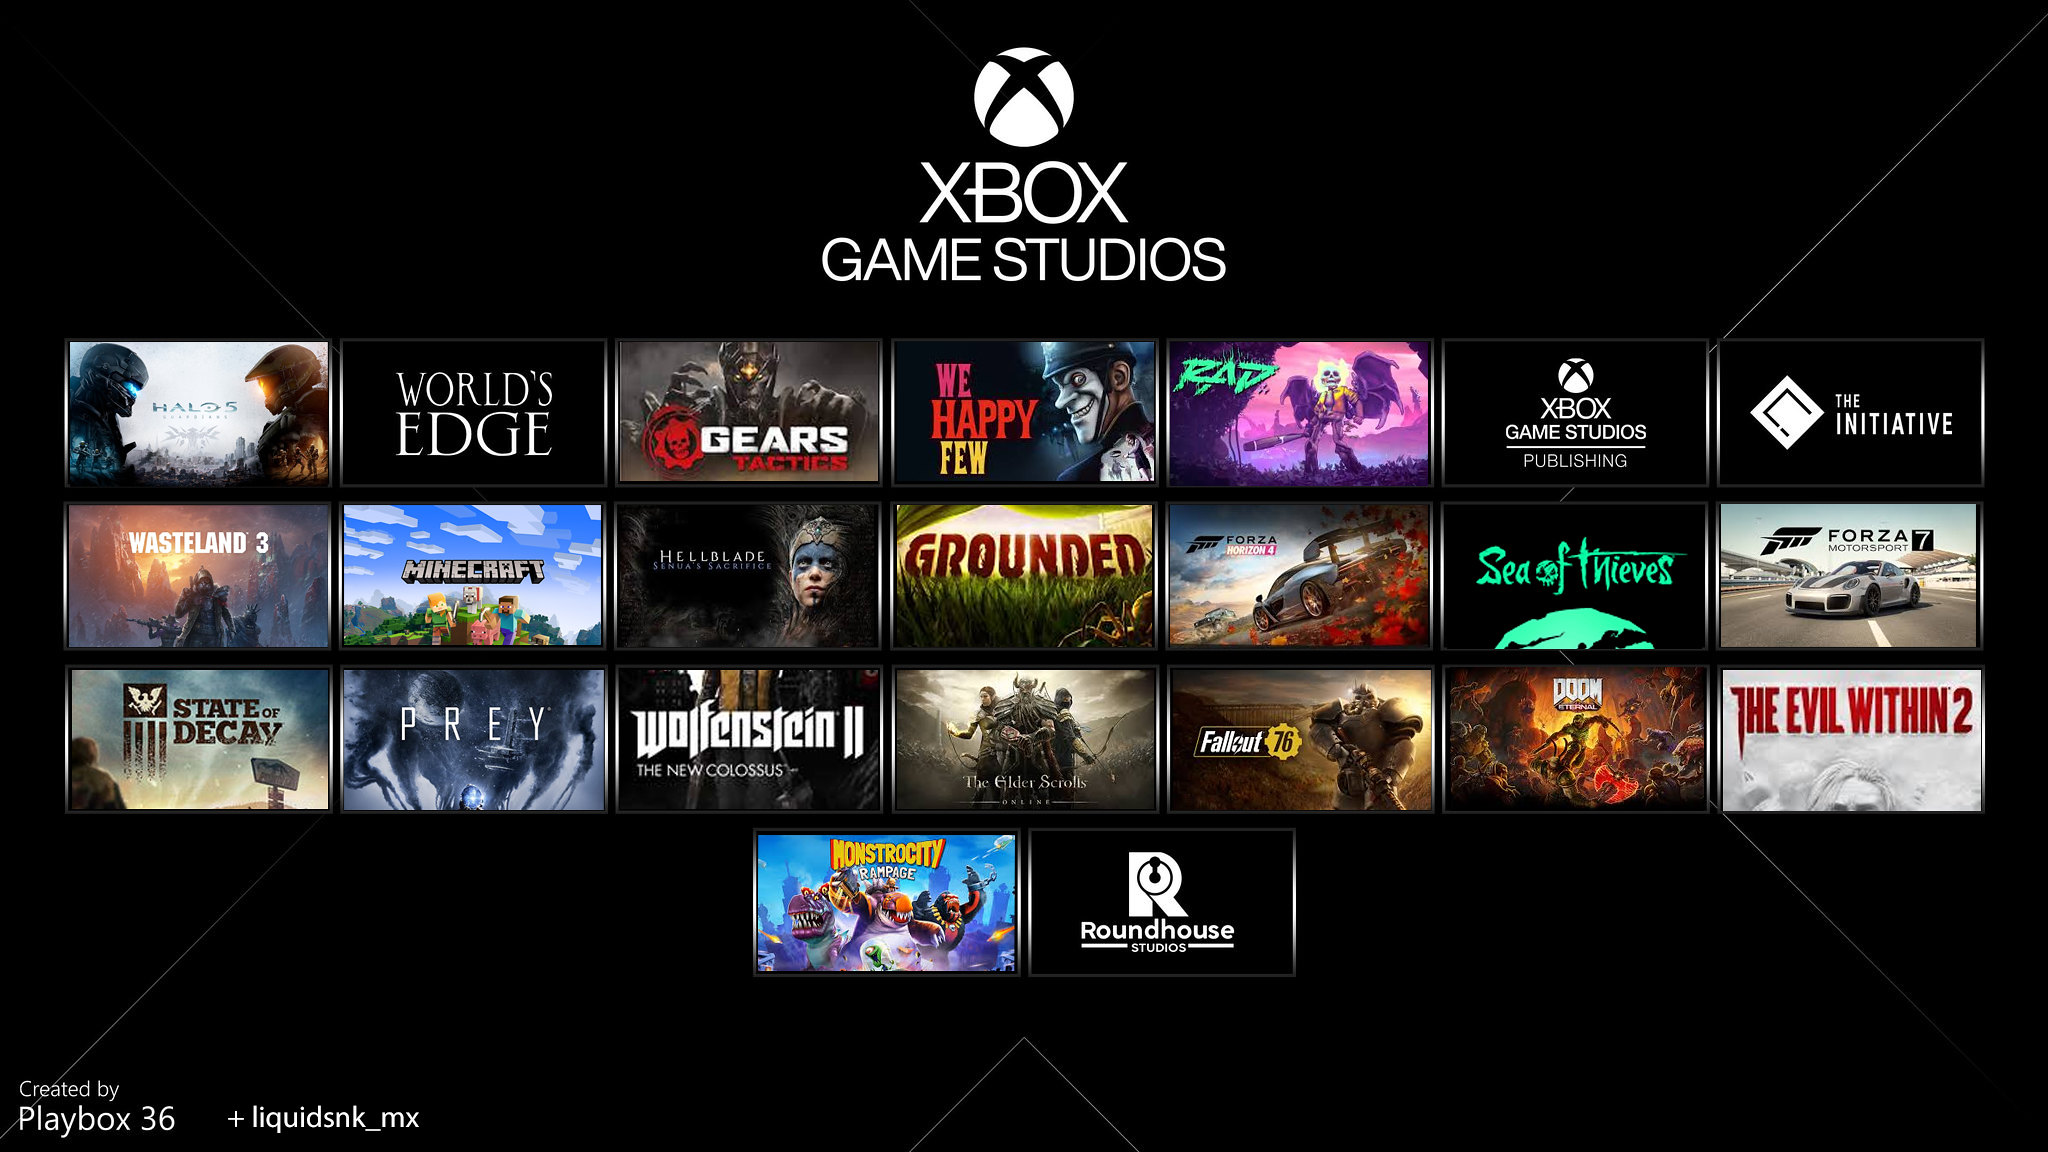 XBOX Game Studios vs. PlayStation Studios - Whose output and potential  output excites you more?